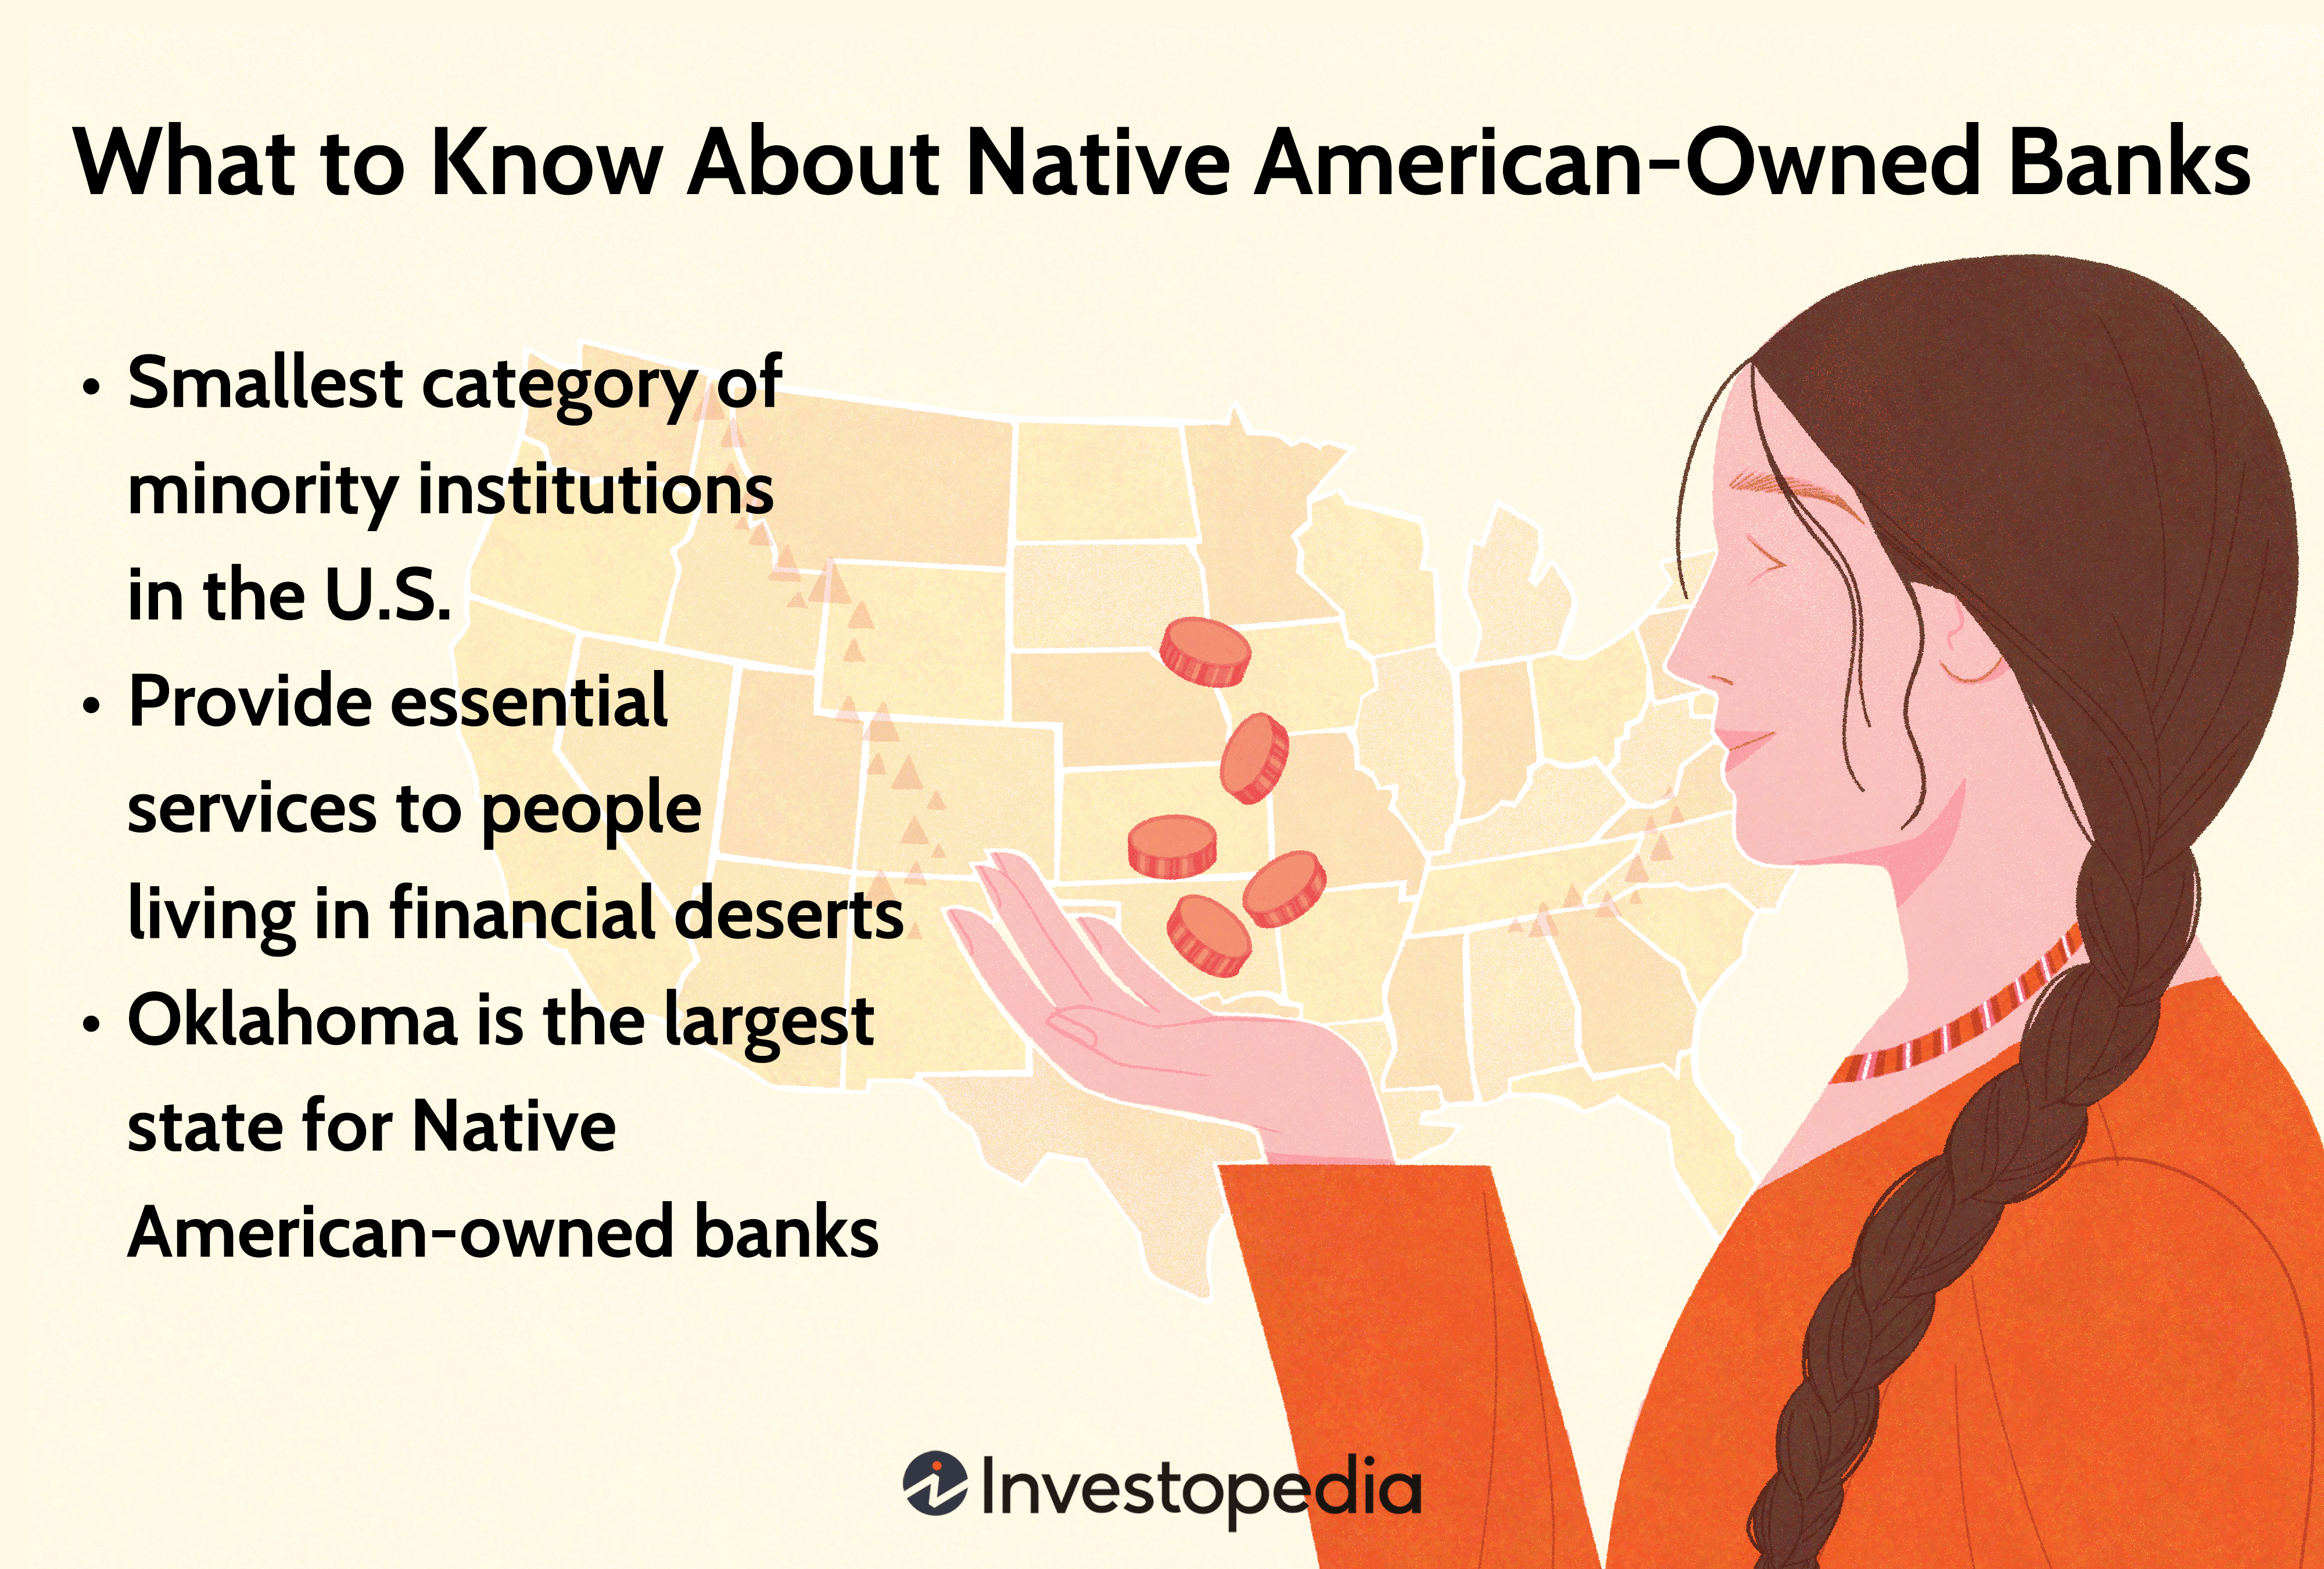 What to Know About Native American-Owned Banks